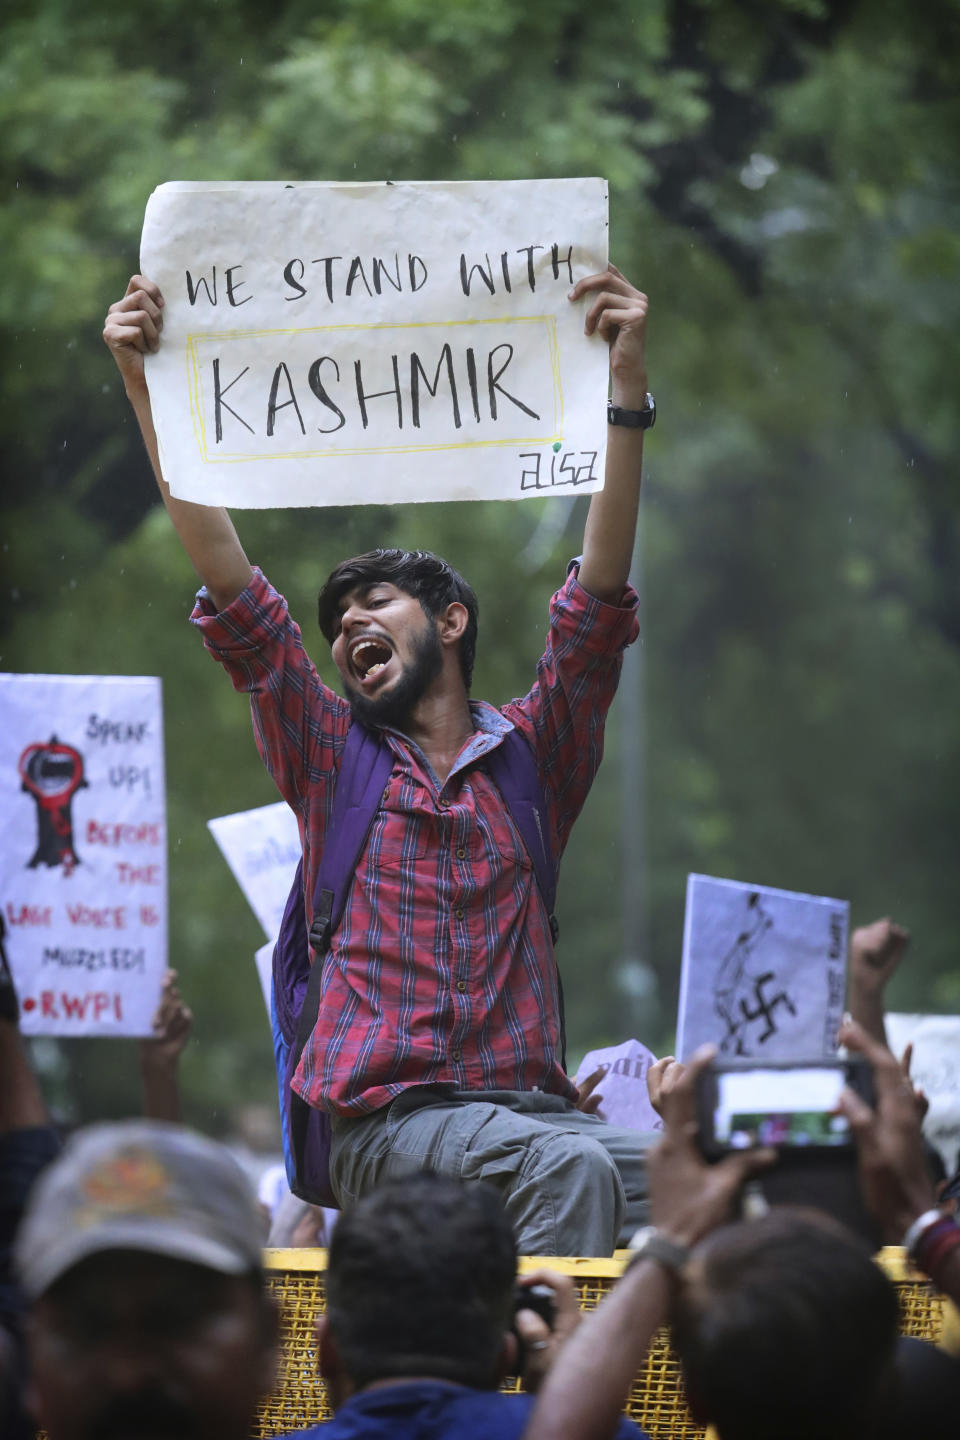 FILE - In this Aug. 5, 2019, file photo, left party supporters and students shout slogans during a protest against the Indian government revoking Kashmir's special constitutional status in New Delhi, India. India on Thursday, Oct. 31, 2019, formally implemented legislation approved by its Parliament in early August that removes Indian-controlled Kashmir's semi-autonomous status and begins direct federal rule of the disputed area amid a harsh security lockdown and widespread public disenchantment. (AP Photo/Manish Swarup, File)